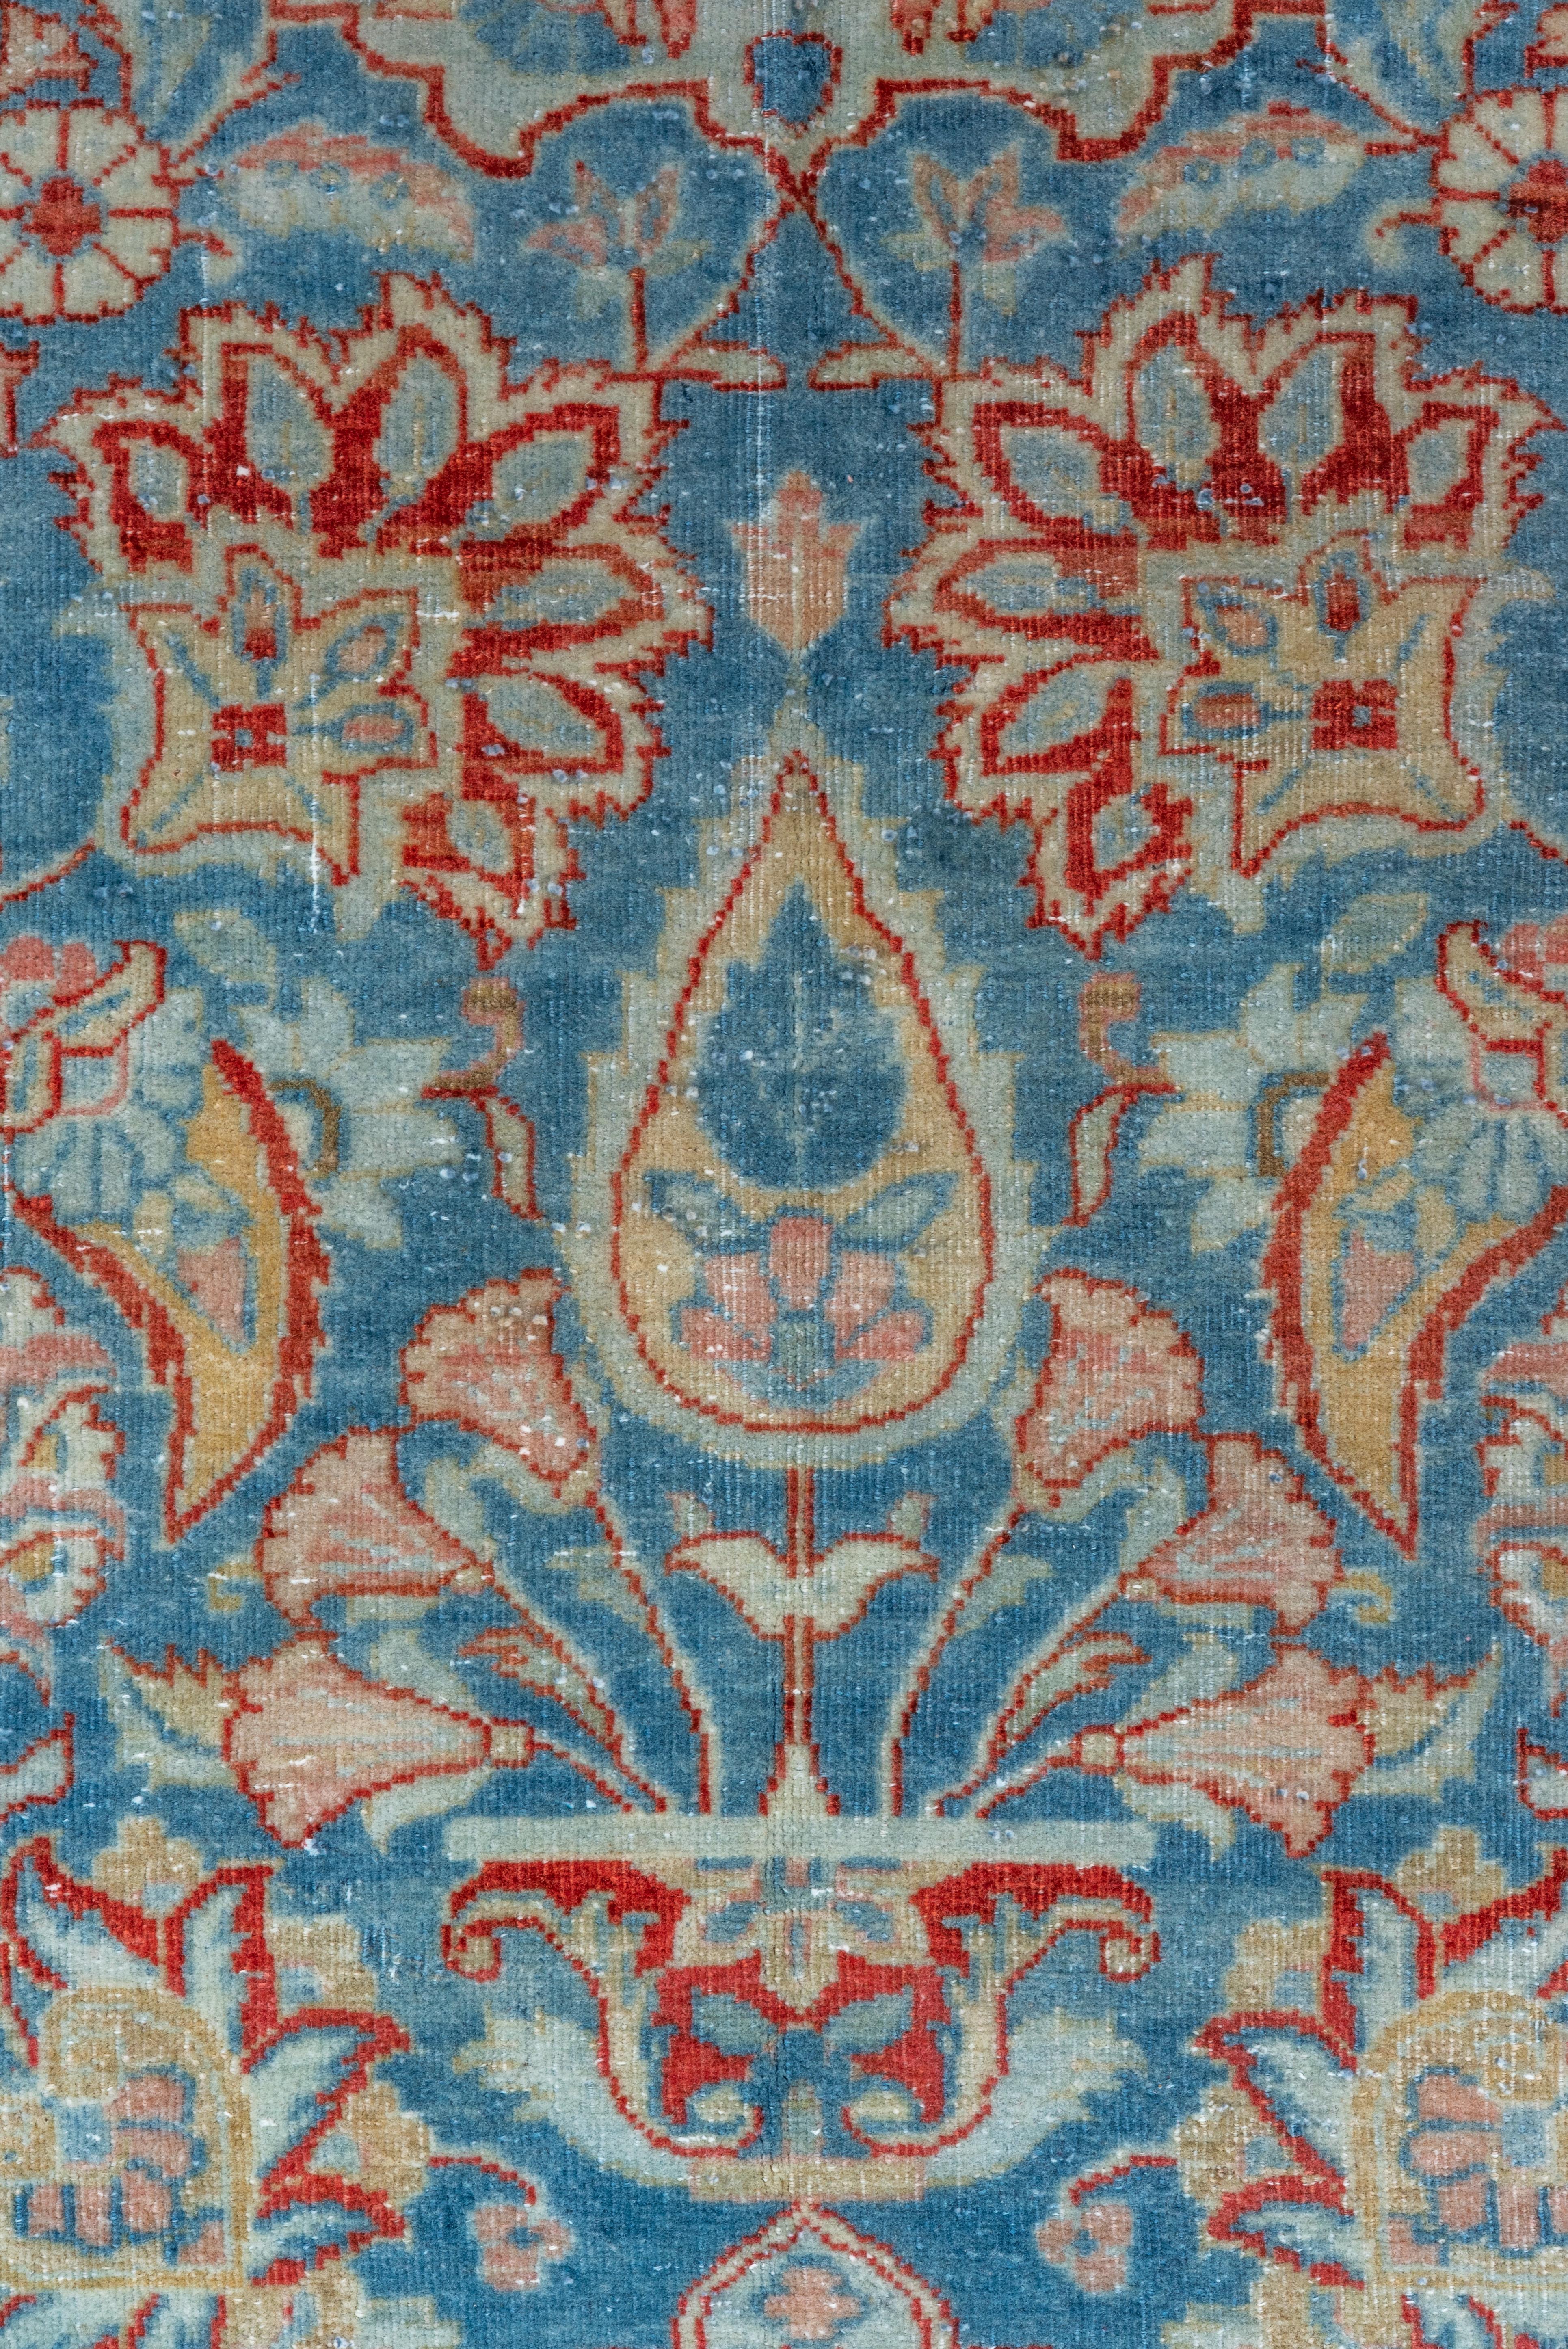 Eliko Rugs by David Ariel Finely Woven Antique Kashan Carpet with Reds and Blues In Good Condition For Sale In New York, NY